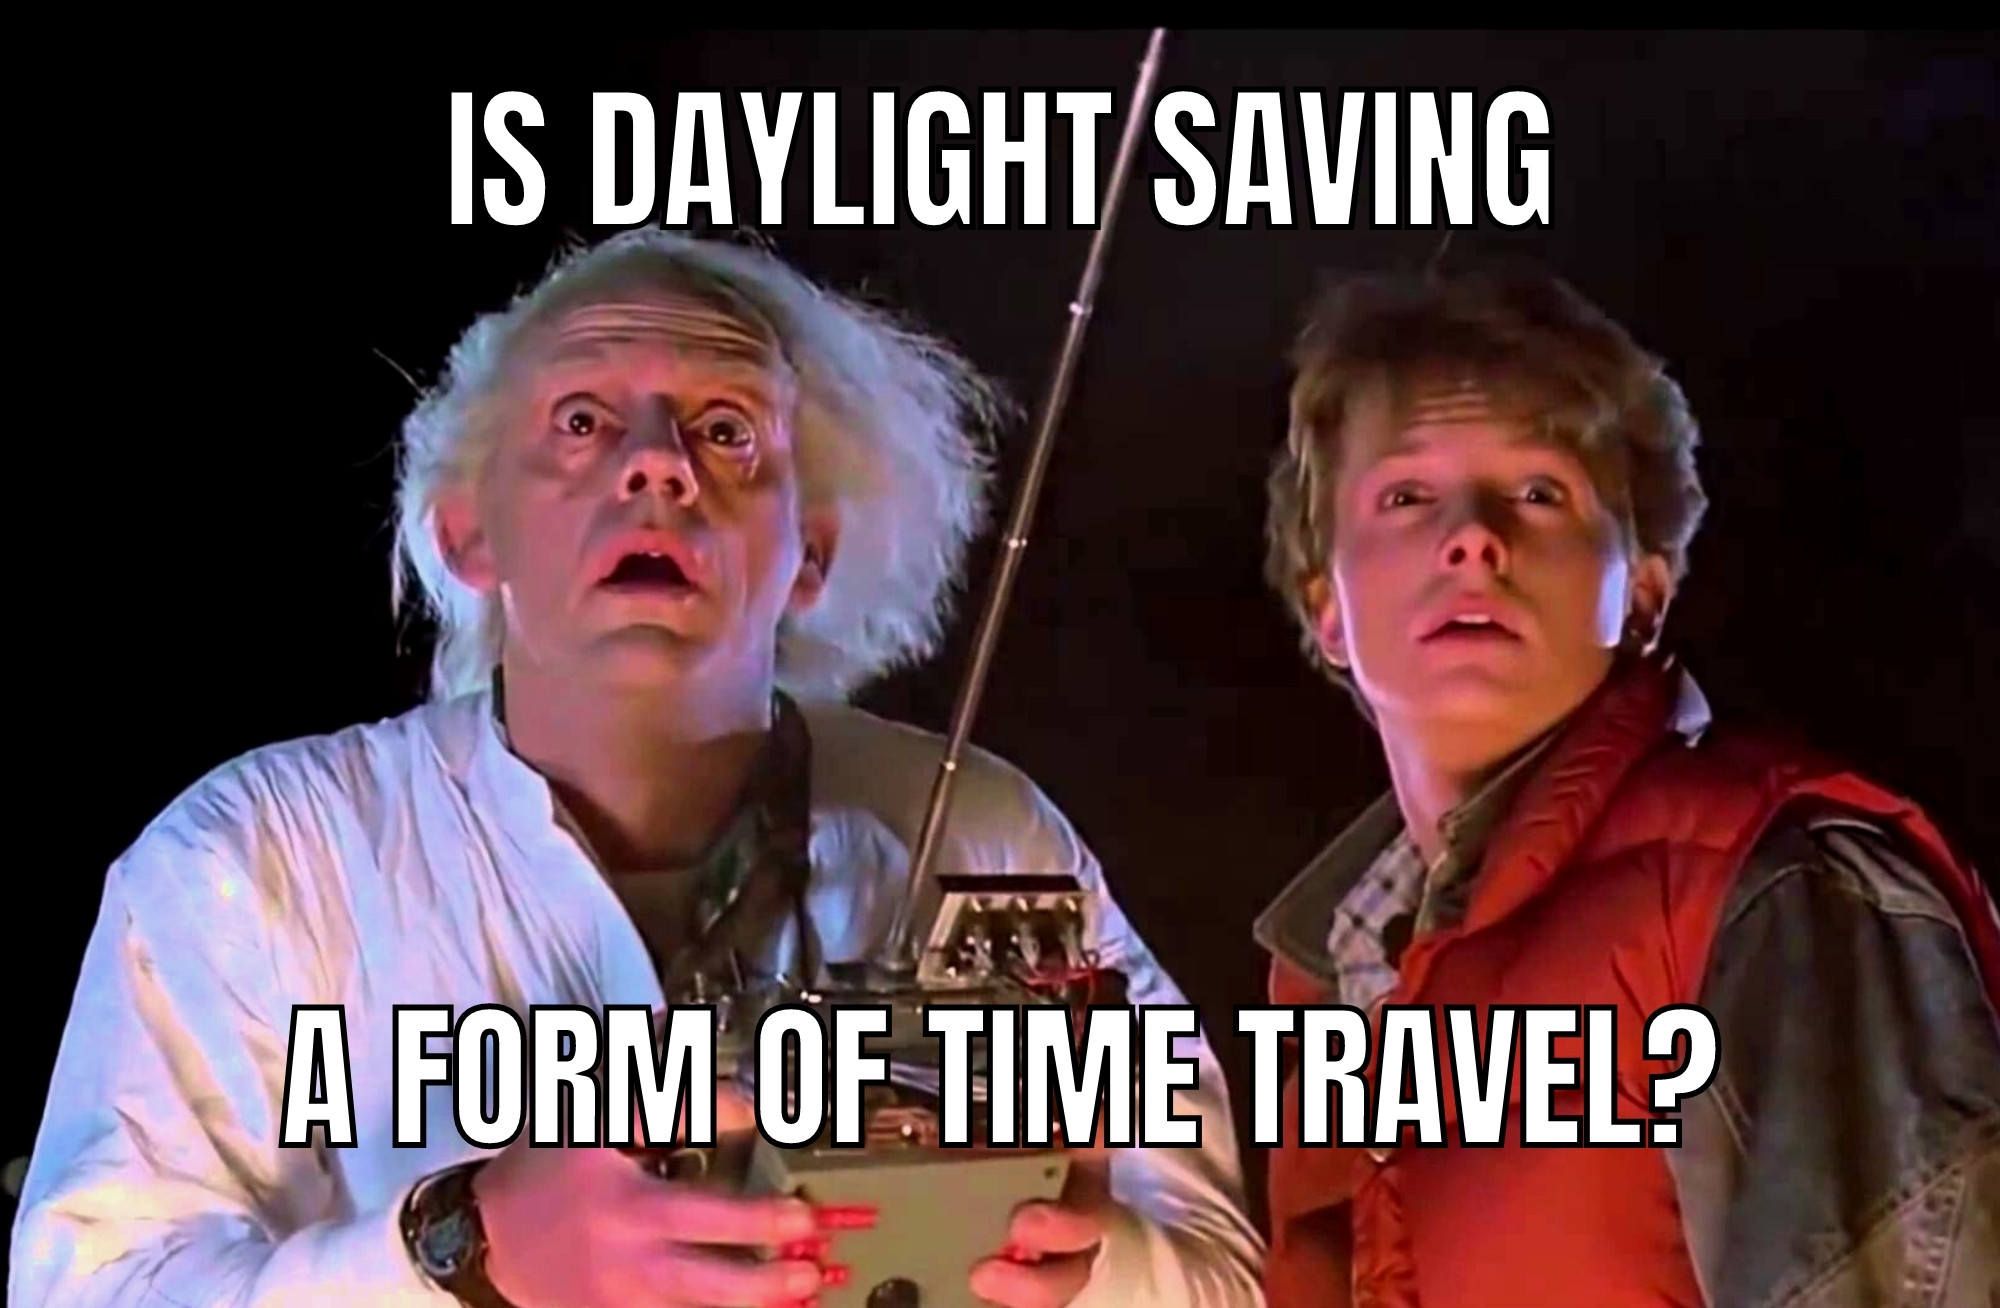 Daylight saving time is even weirder than you think